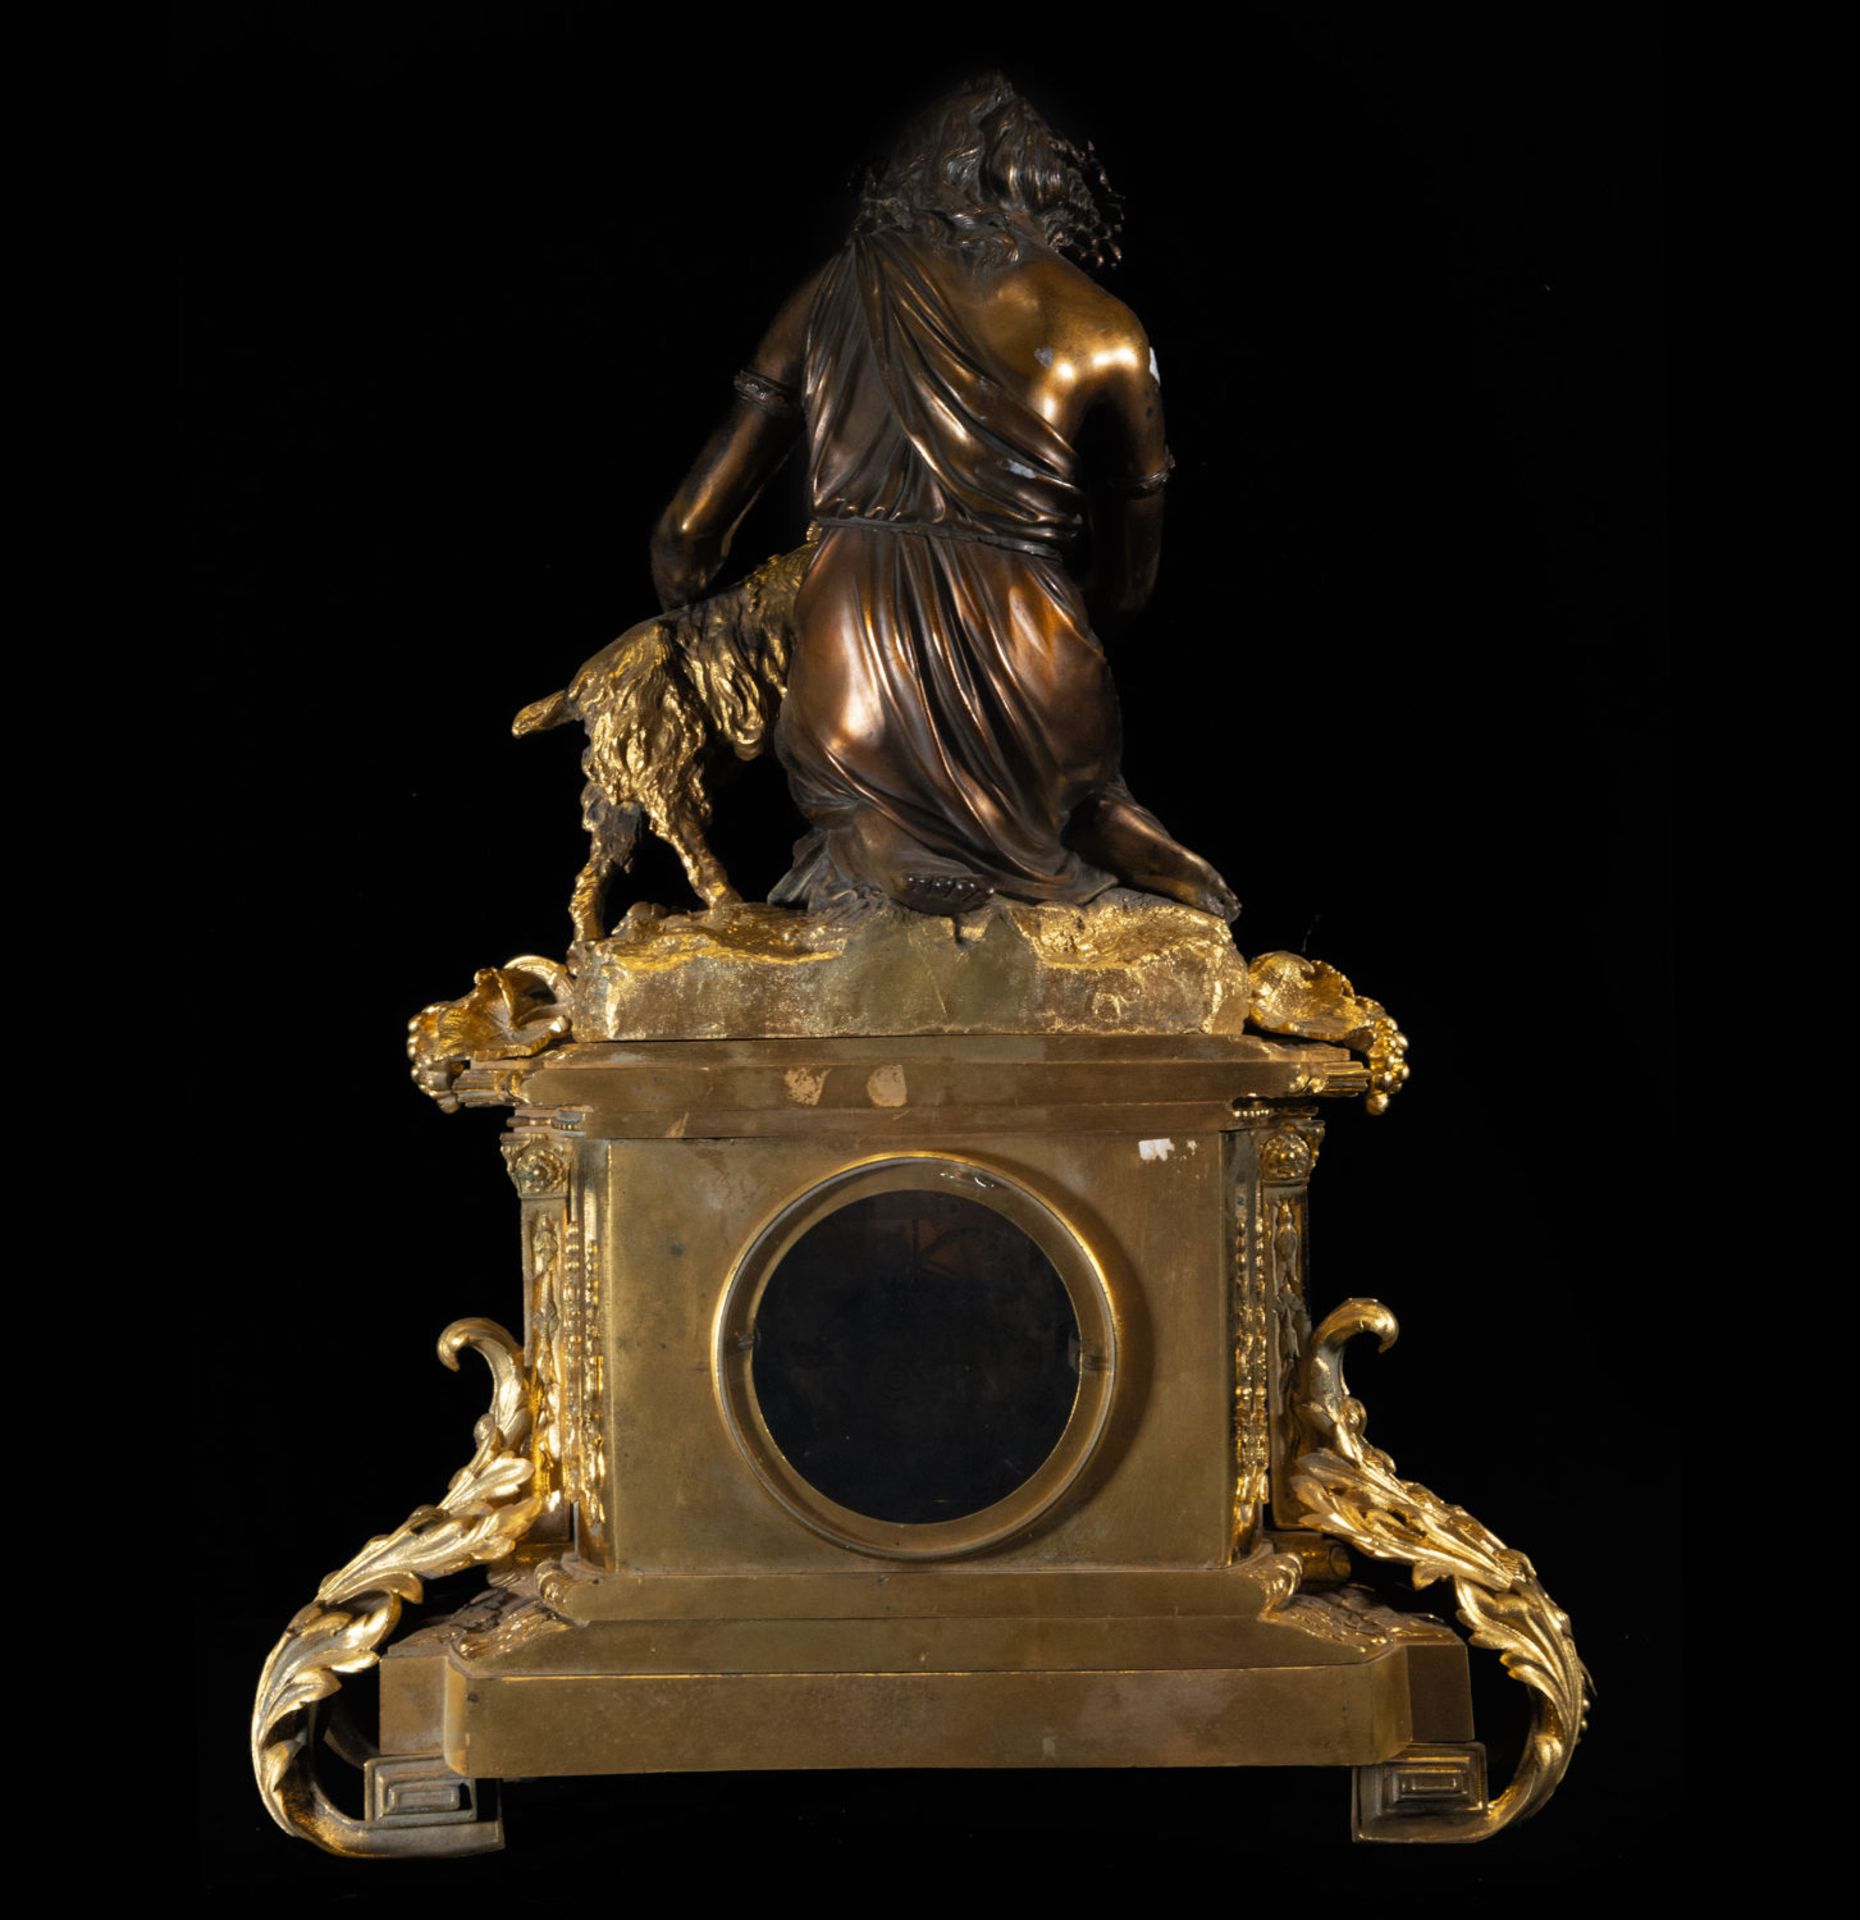 Exquisite Large French Table Clock in Mercury-Gilded Bronze and Alabaster with Bacchus and Goat, Nap - Image 9 of 9